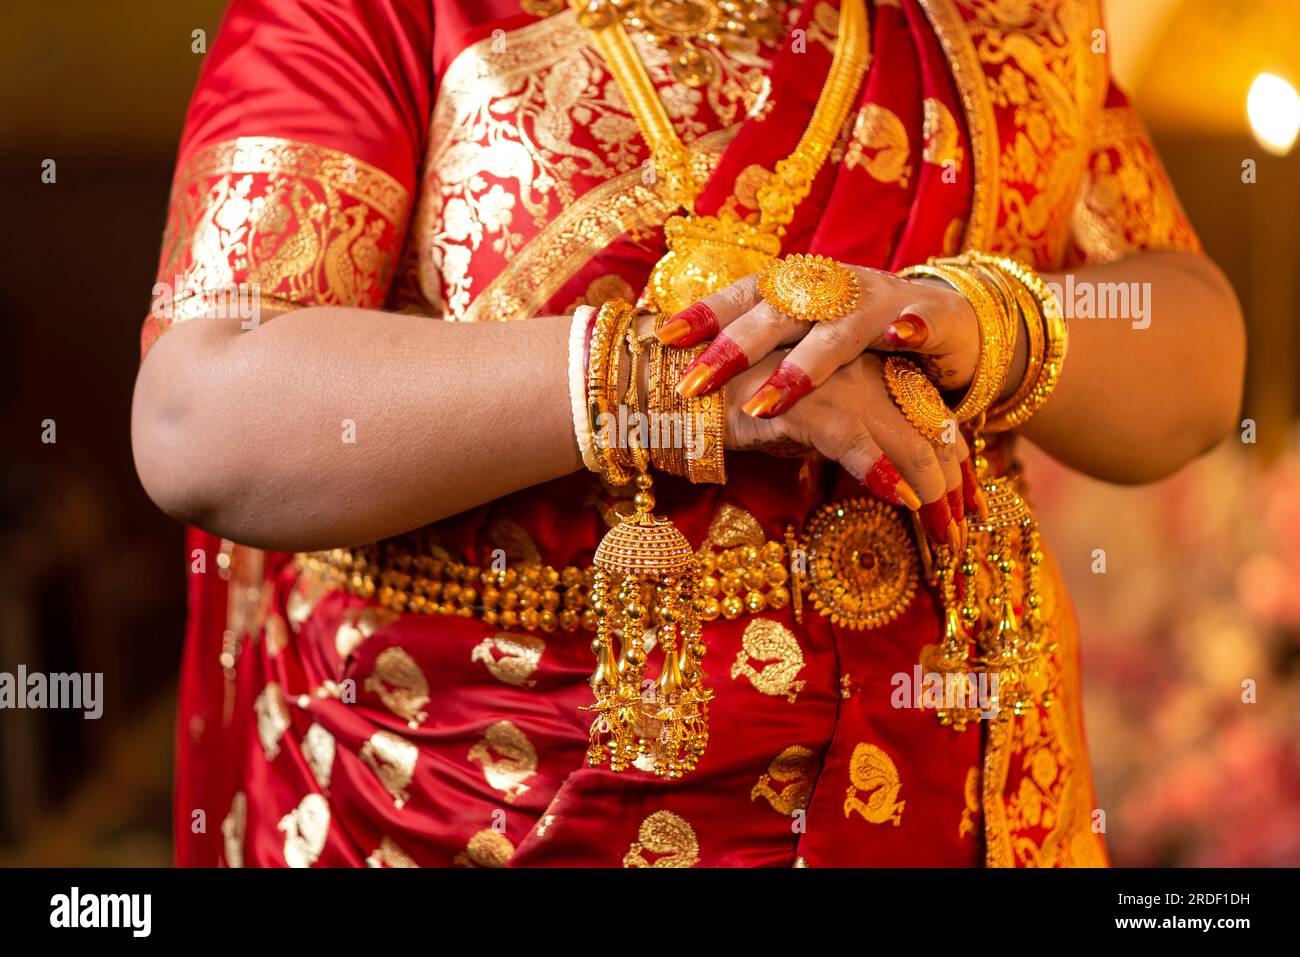 July 21, 2023, Dhaka, Dhaka, Bangladesh: A Bangladeshi Hindu bride wears traditional gold Jewellery during the wedding ceremony in Dhaka, Bangladesh. The price of gold in Bangladesh has surged to a new all-time high, crossing the Tk 0.1 million-mark for the first time. The Bangladesh Jewellers' Association (BAJUS) announced on Thursday that the new price of gold per bhori (11.664 grams) is Tk 100,778. This is an increase of Tk 1,984 from the previous price of Tk 98,794. The surge in gold prices is attributed to the rise in the international market. The price of metal on the international marke Stock Photo